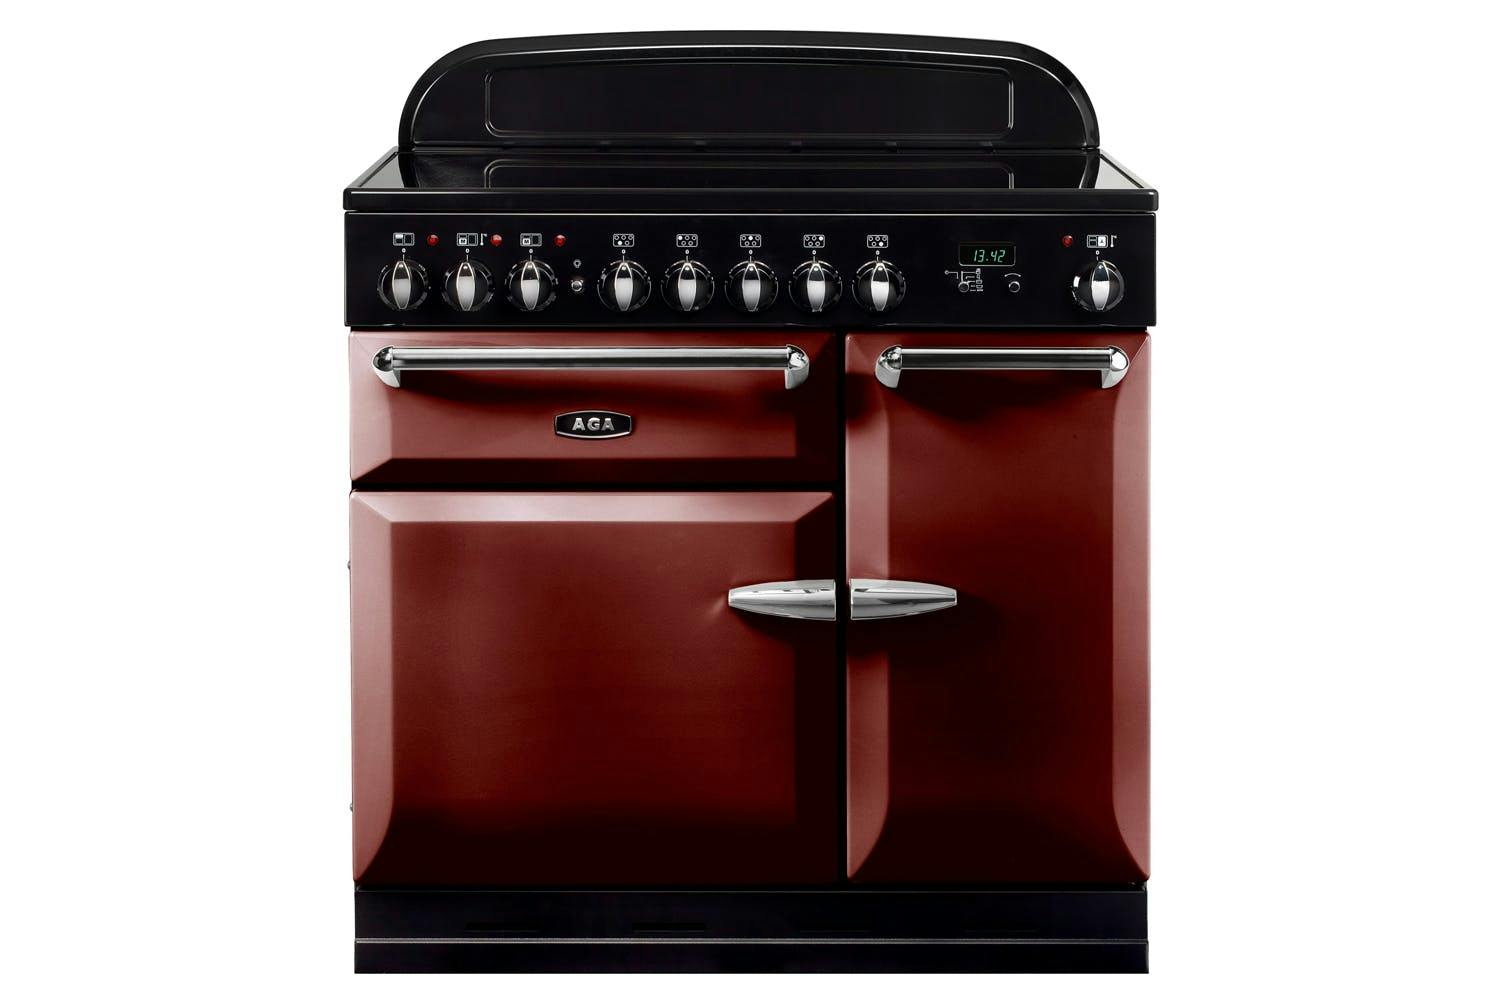 Stanley Supreme Deluxe 90cm Induction Range Cooker | SUP90EICBY | Cranberry